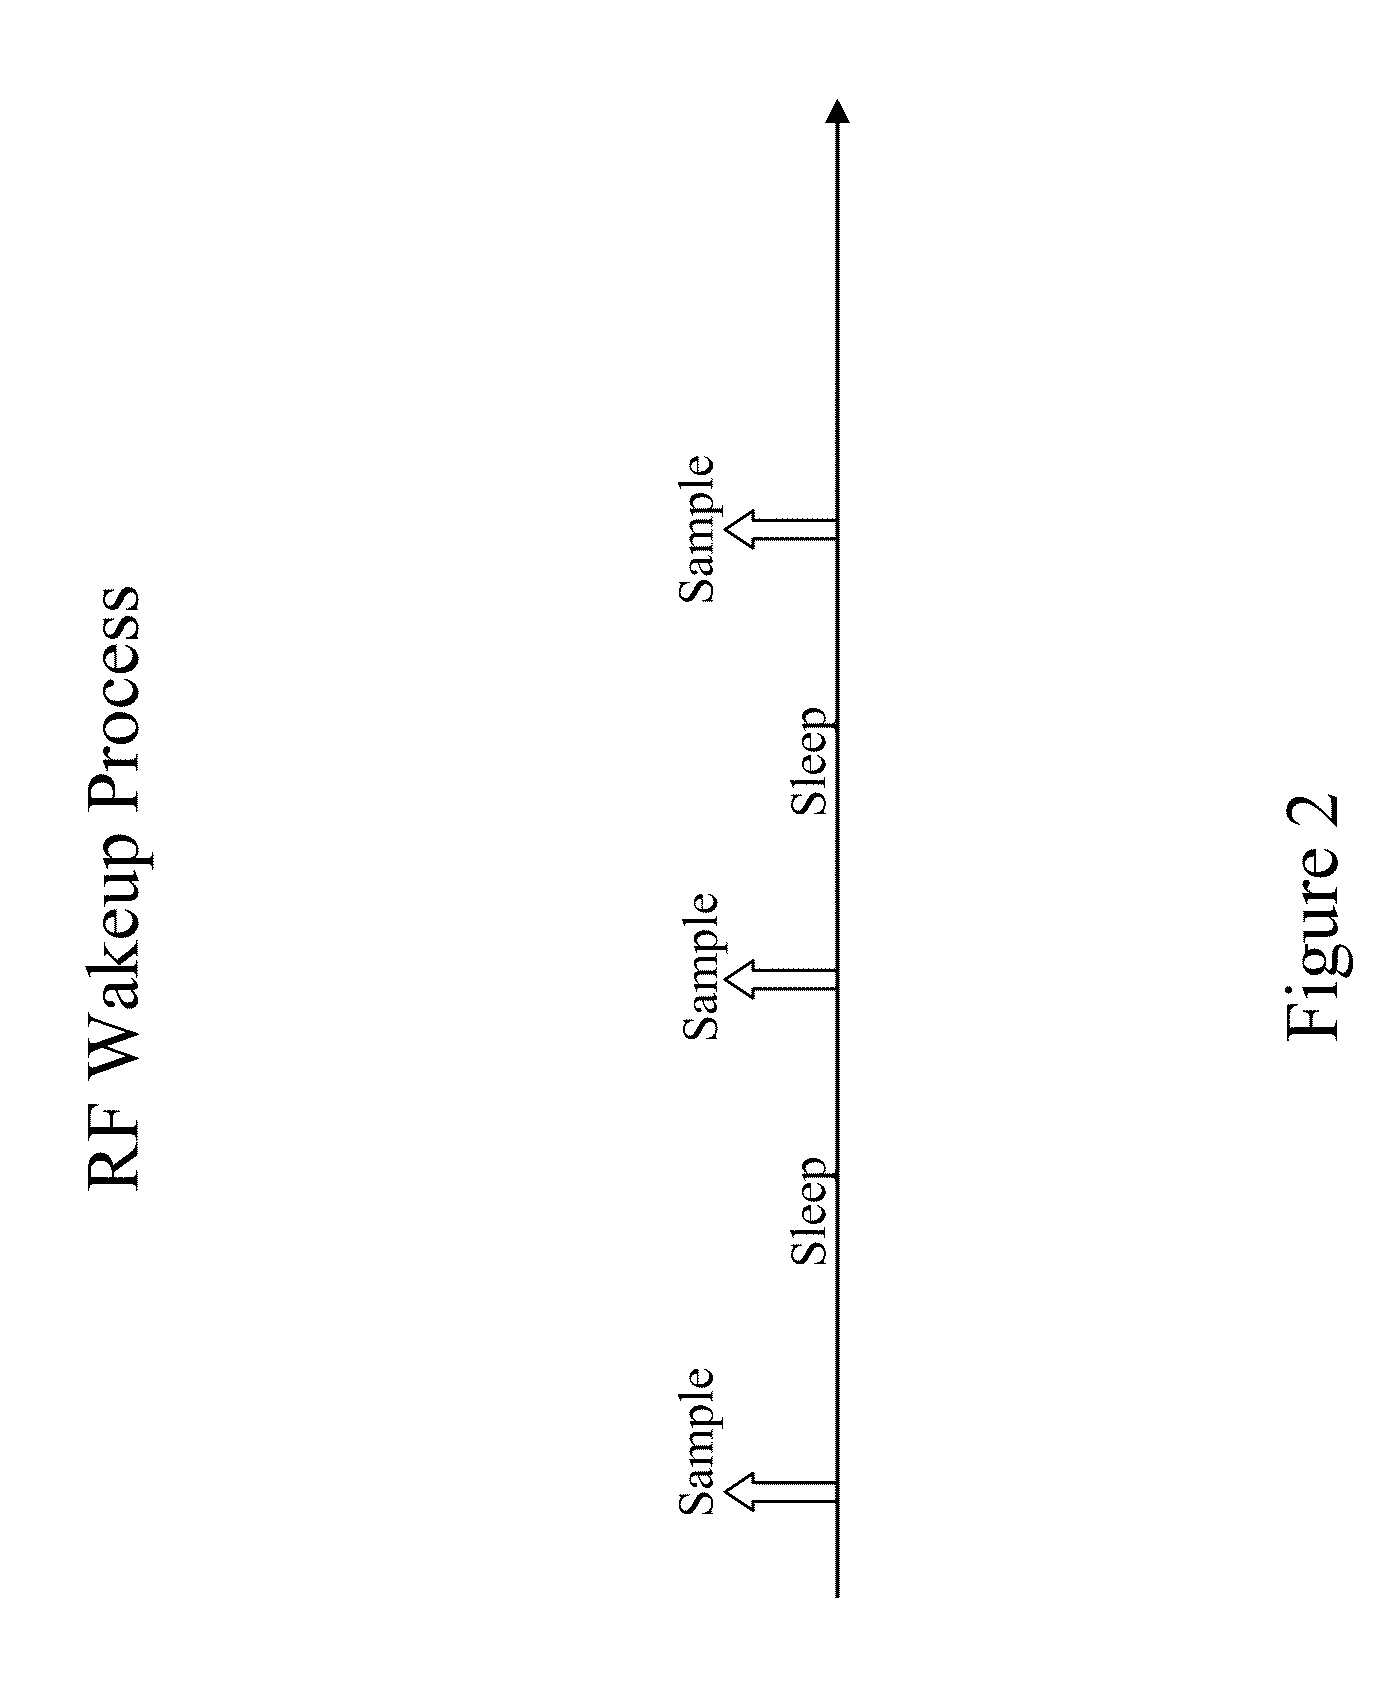 System, method and apparatus employing tone and/or tone patterns to indicate the message type in wireless sensor networks